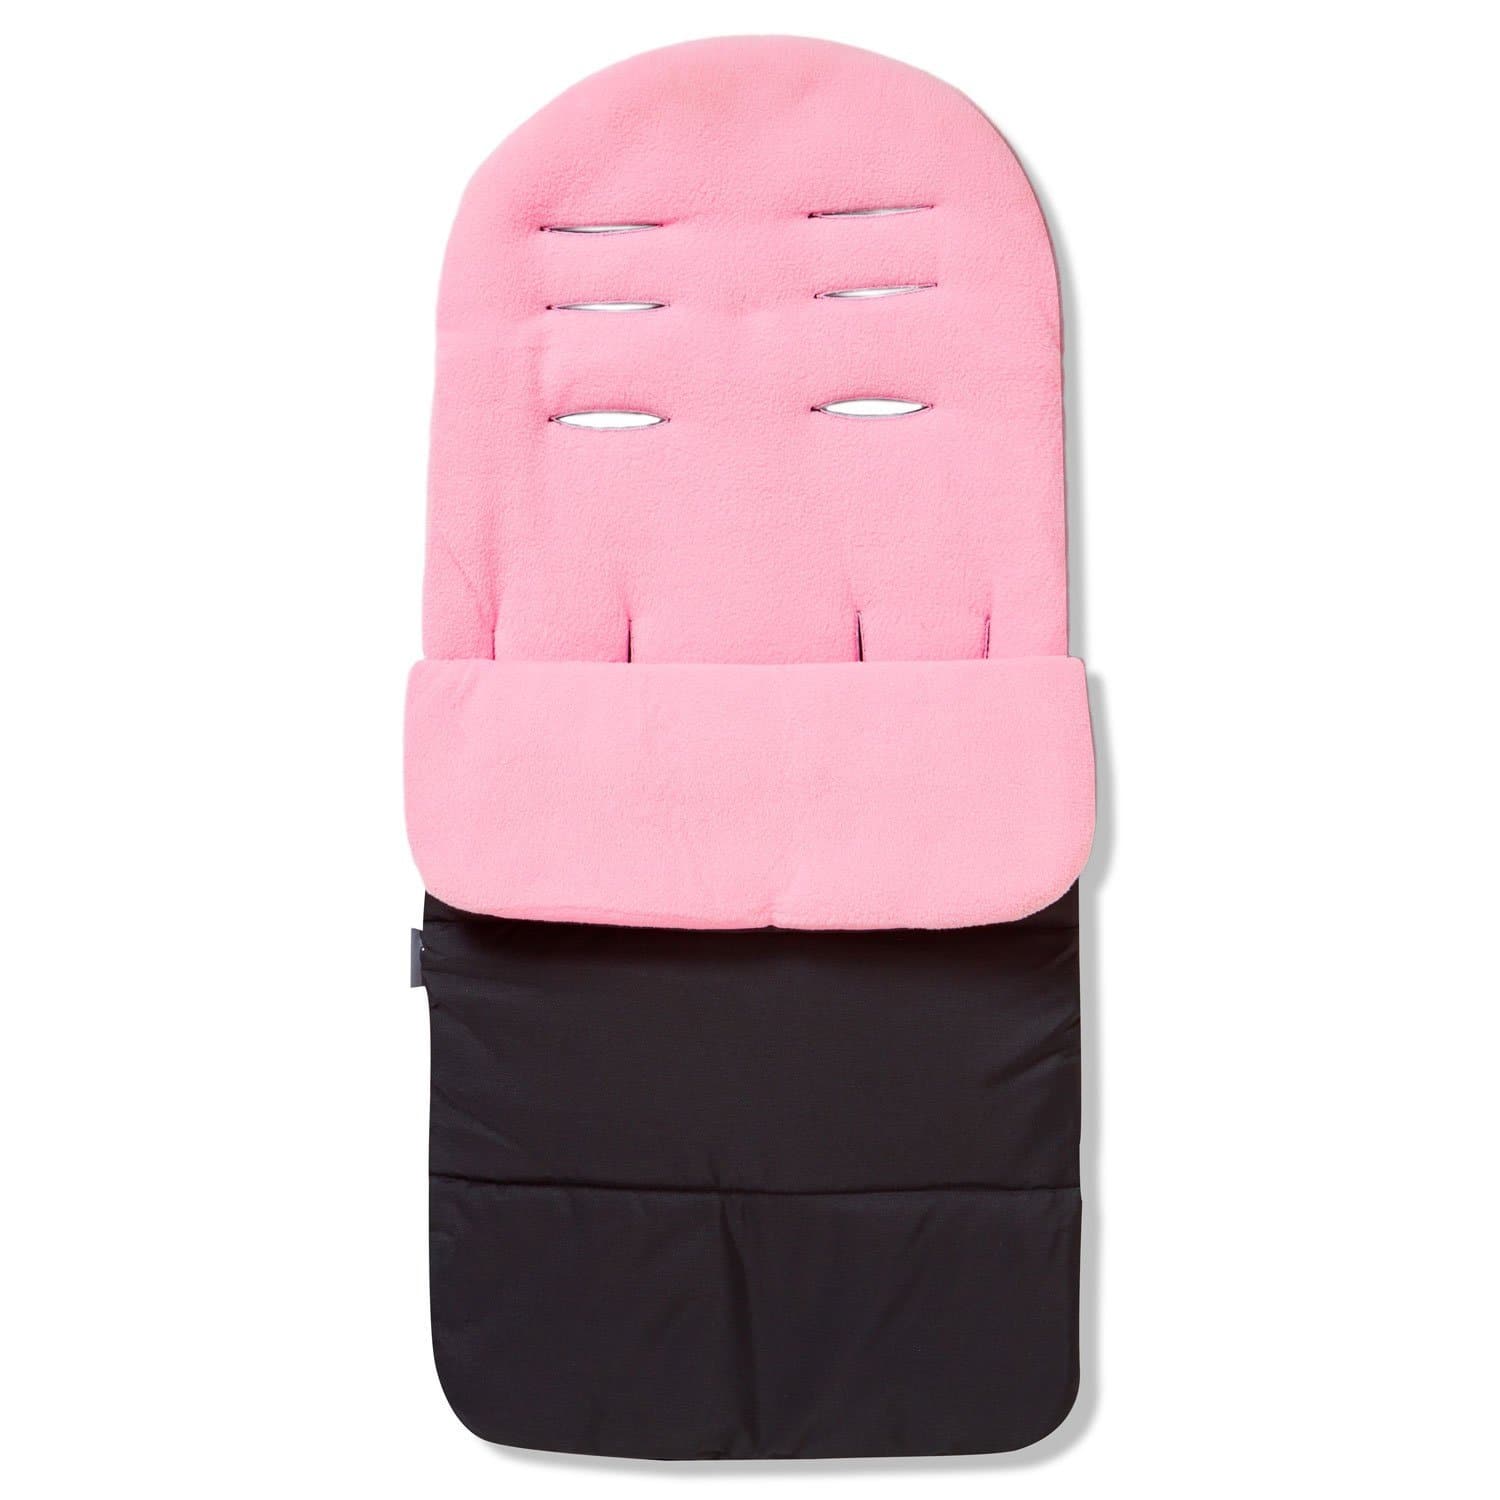 Premium Footmuff / Cosy Toes Compatible with Babyzen - Candy Pink / Fits All Models | For Your Little One